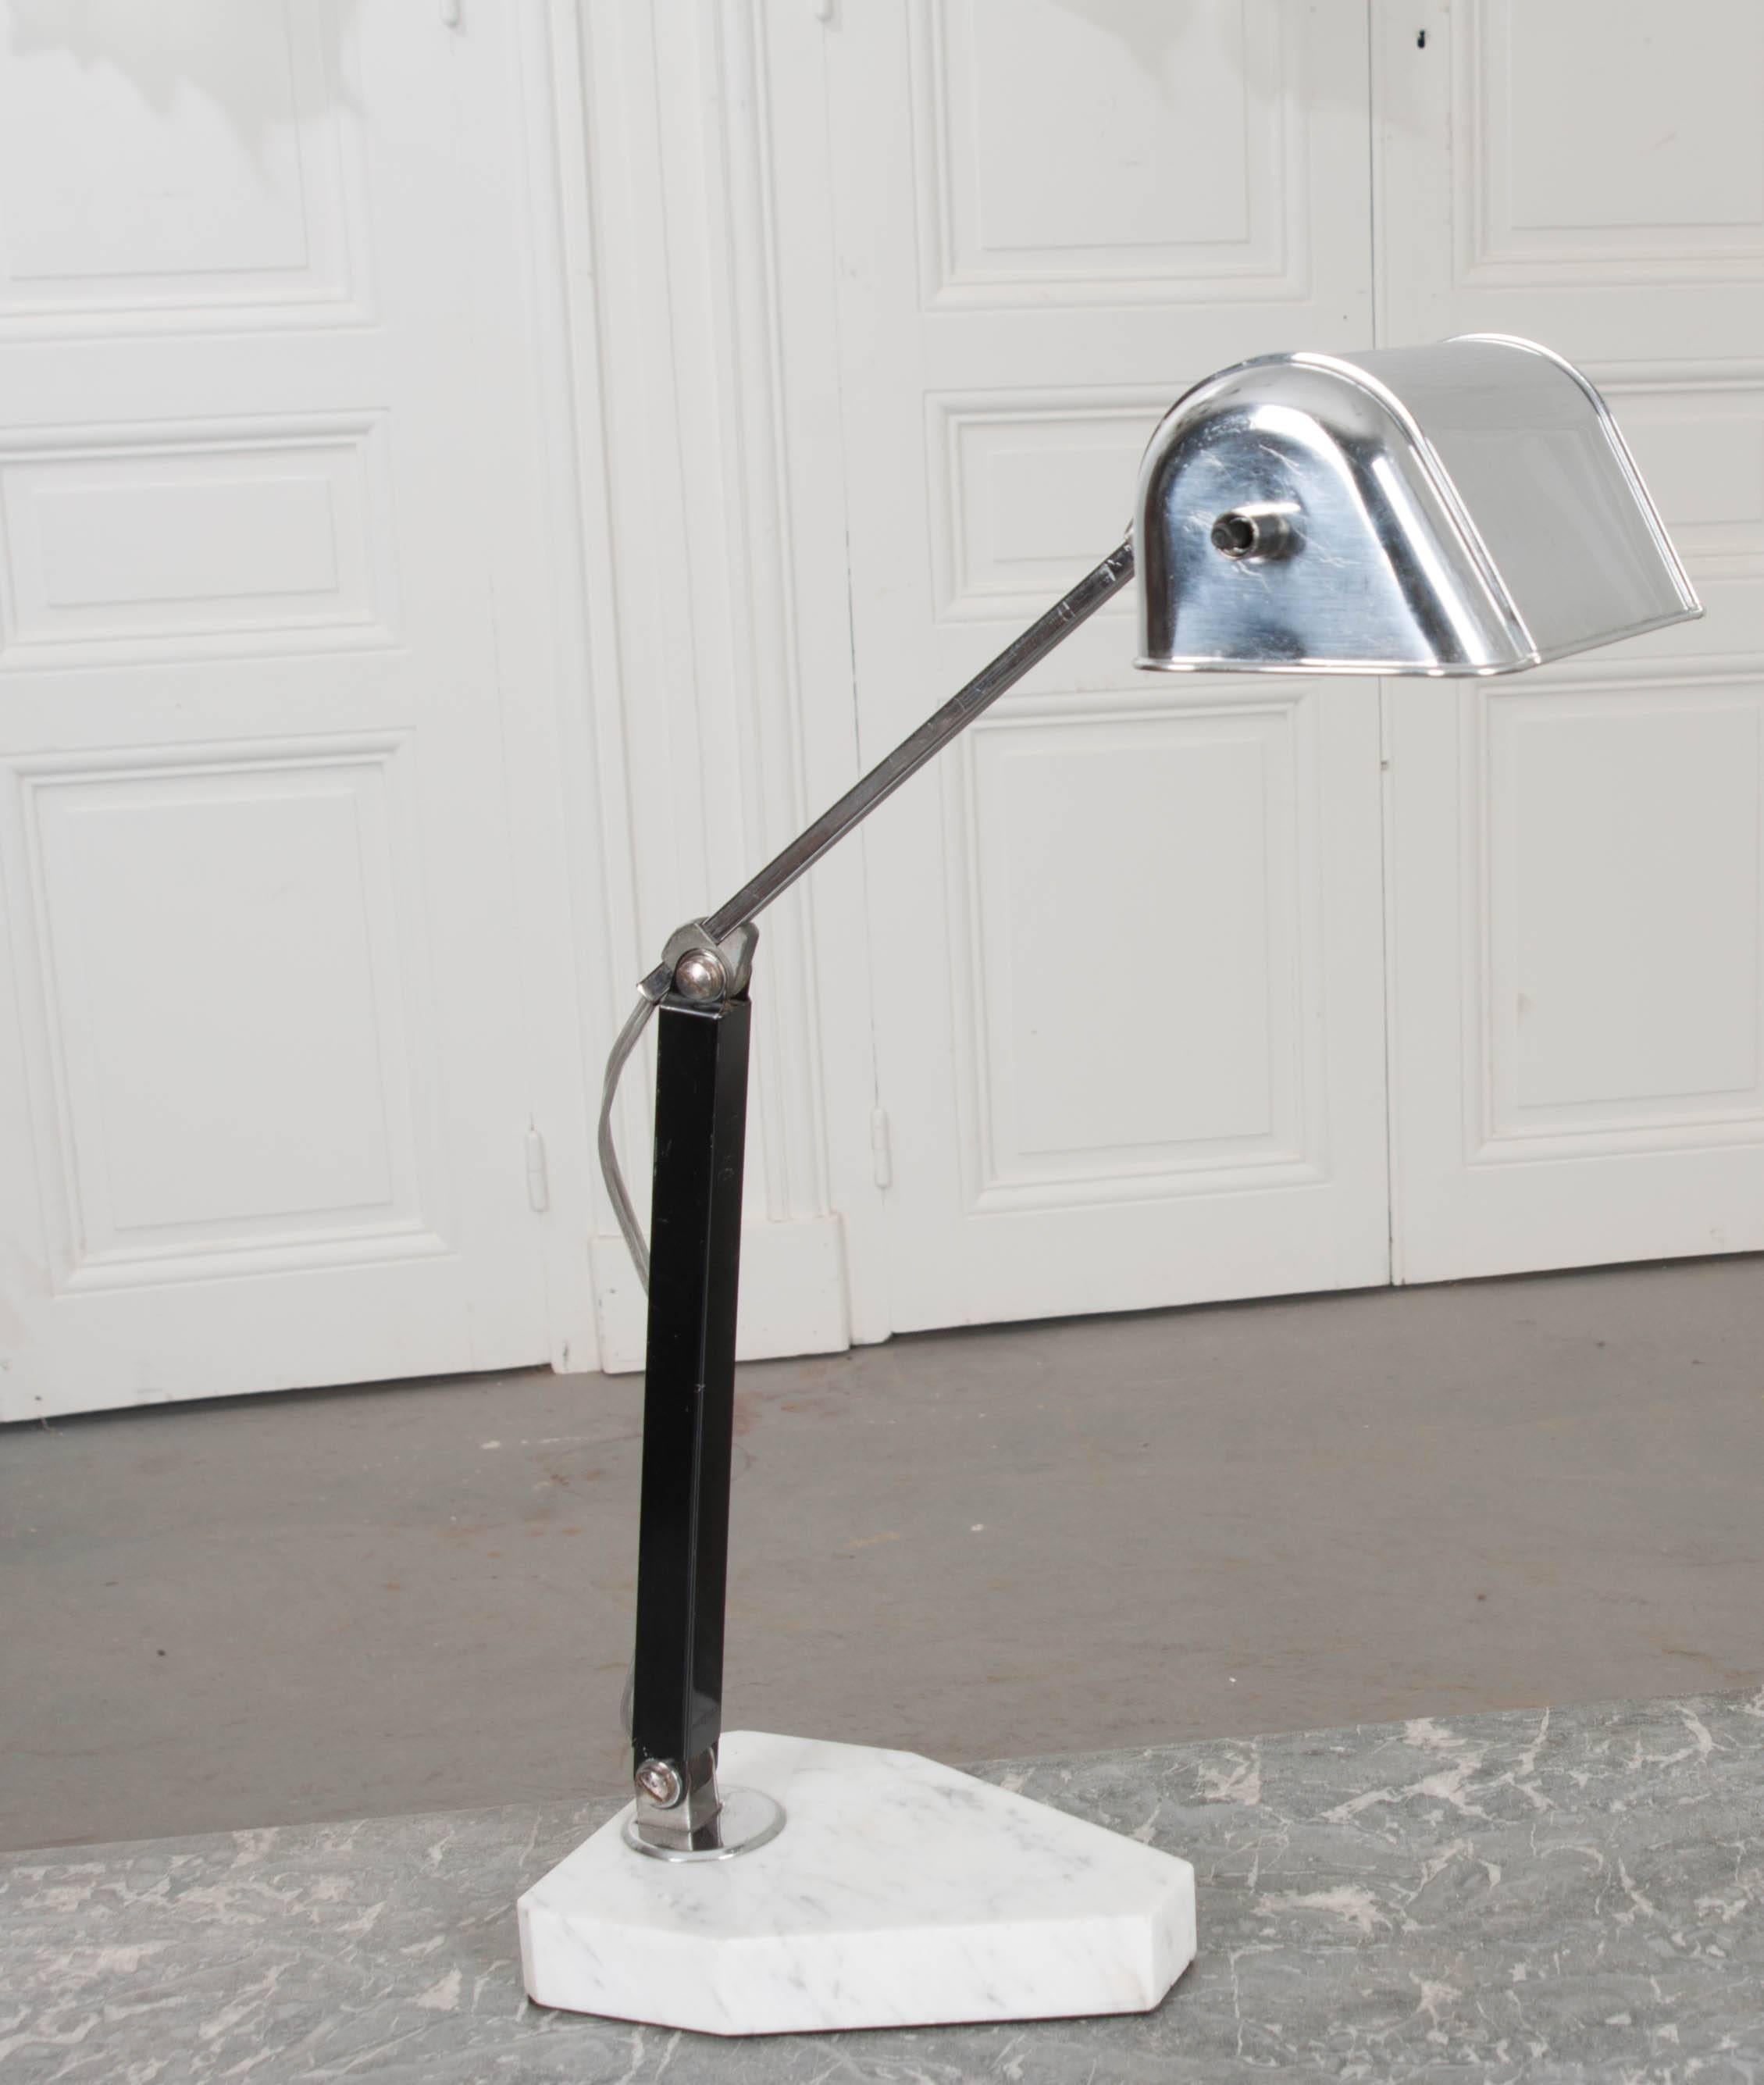 An adjustable chrome and marble desk lamp from 1940s France. The stylish light fixture features a smart, industrial design that is sophisticated and chic. The lamp can be worked into a myriad of configurations, as shown in the detailed photos,